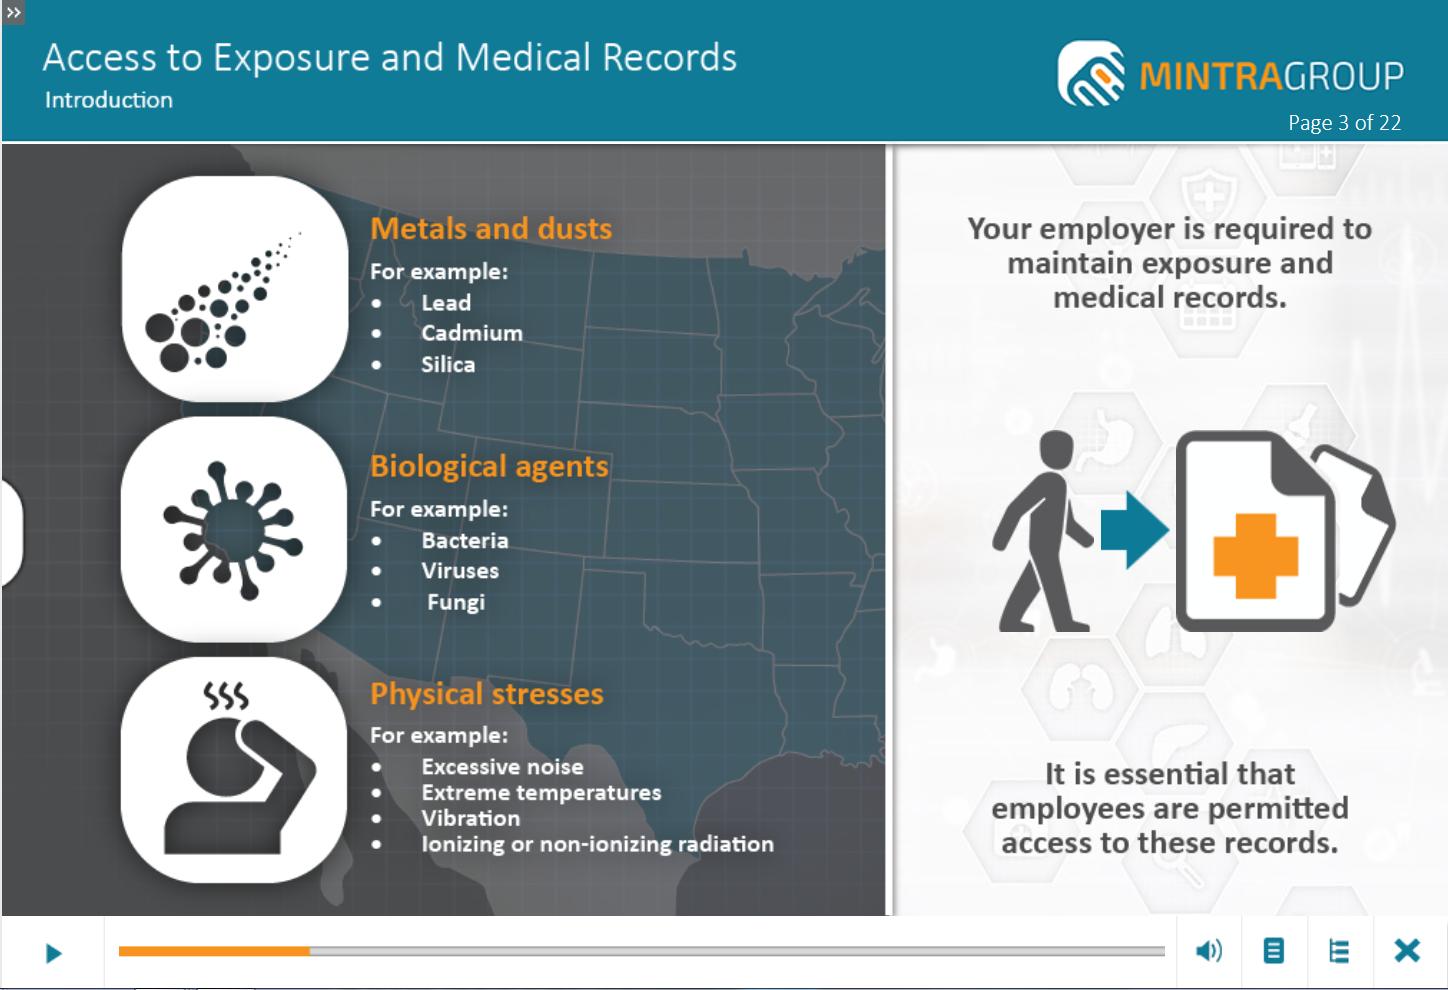 Access to Exposure and Medical Records (US) Training